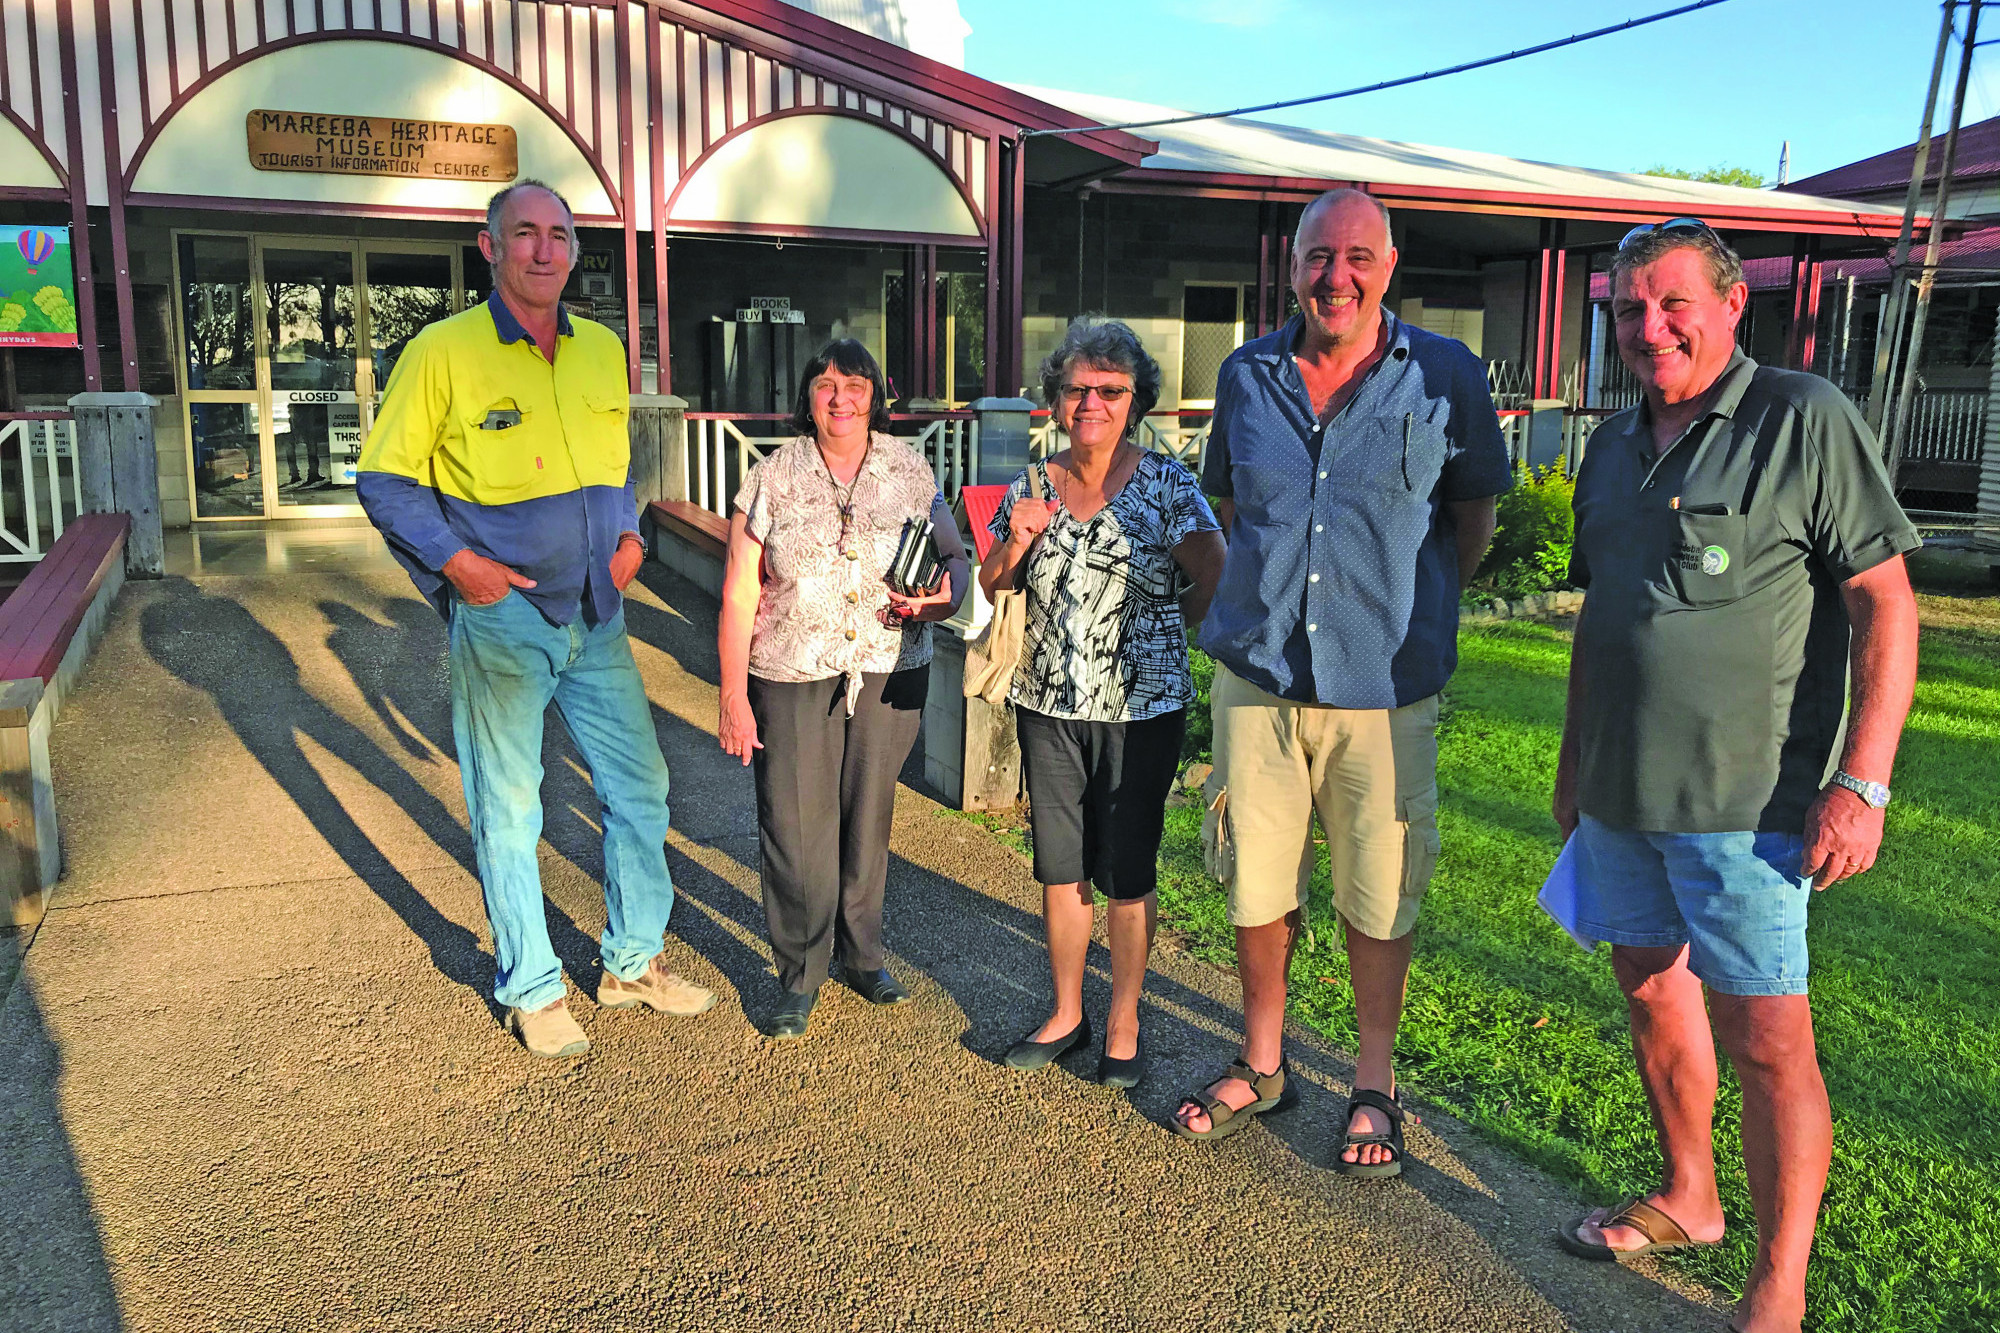 The Save Mareeba Hospital Action Group at a recent meeting at the Mareeba heritage centre where they discussed the lack of dialysis support at the Mareeba Hospital.